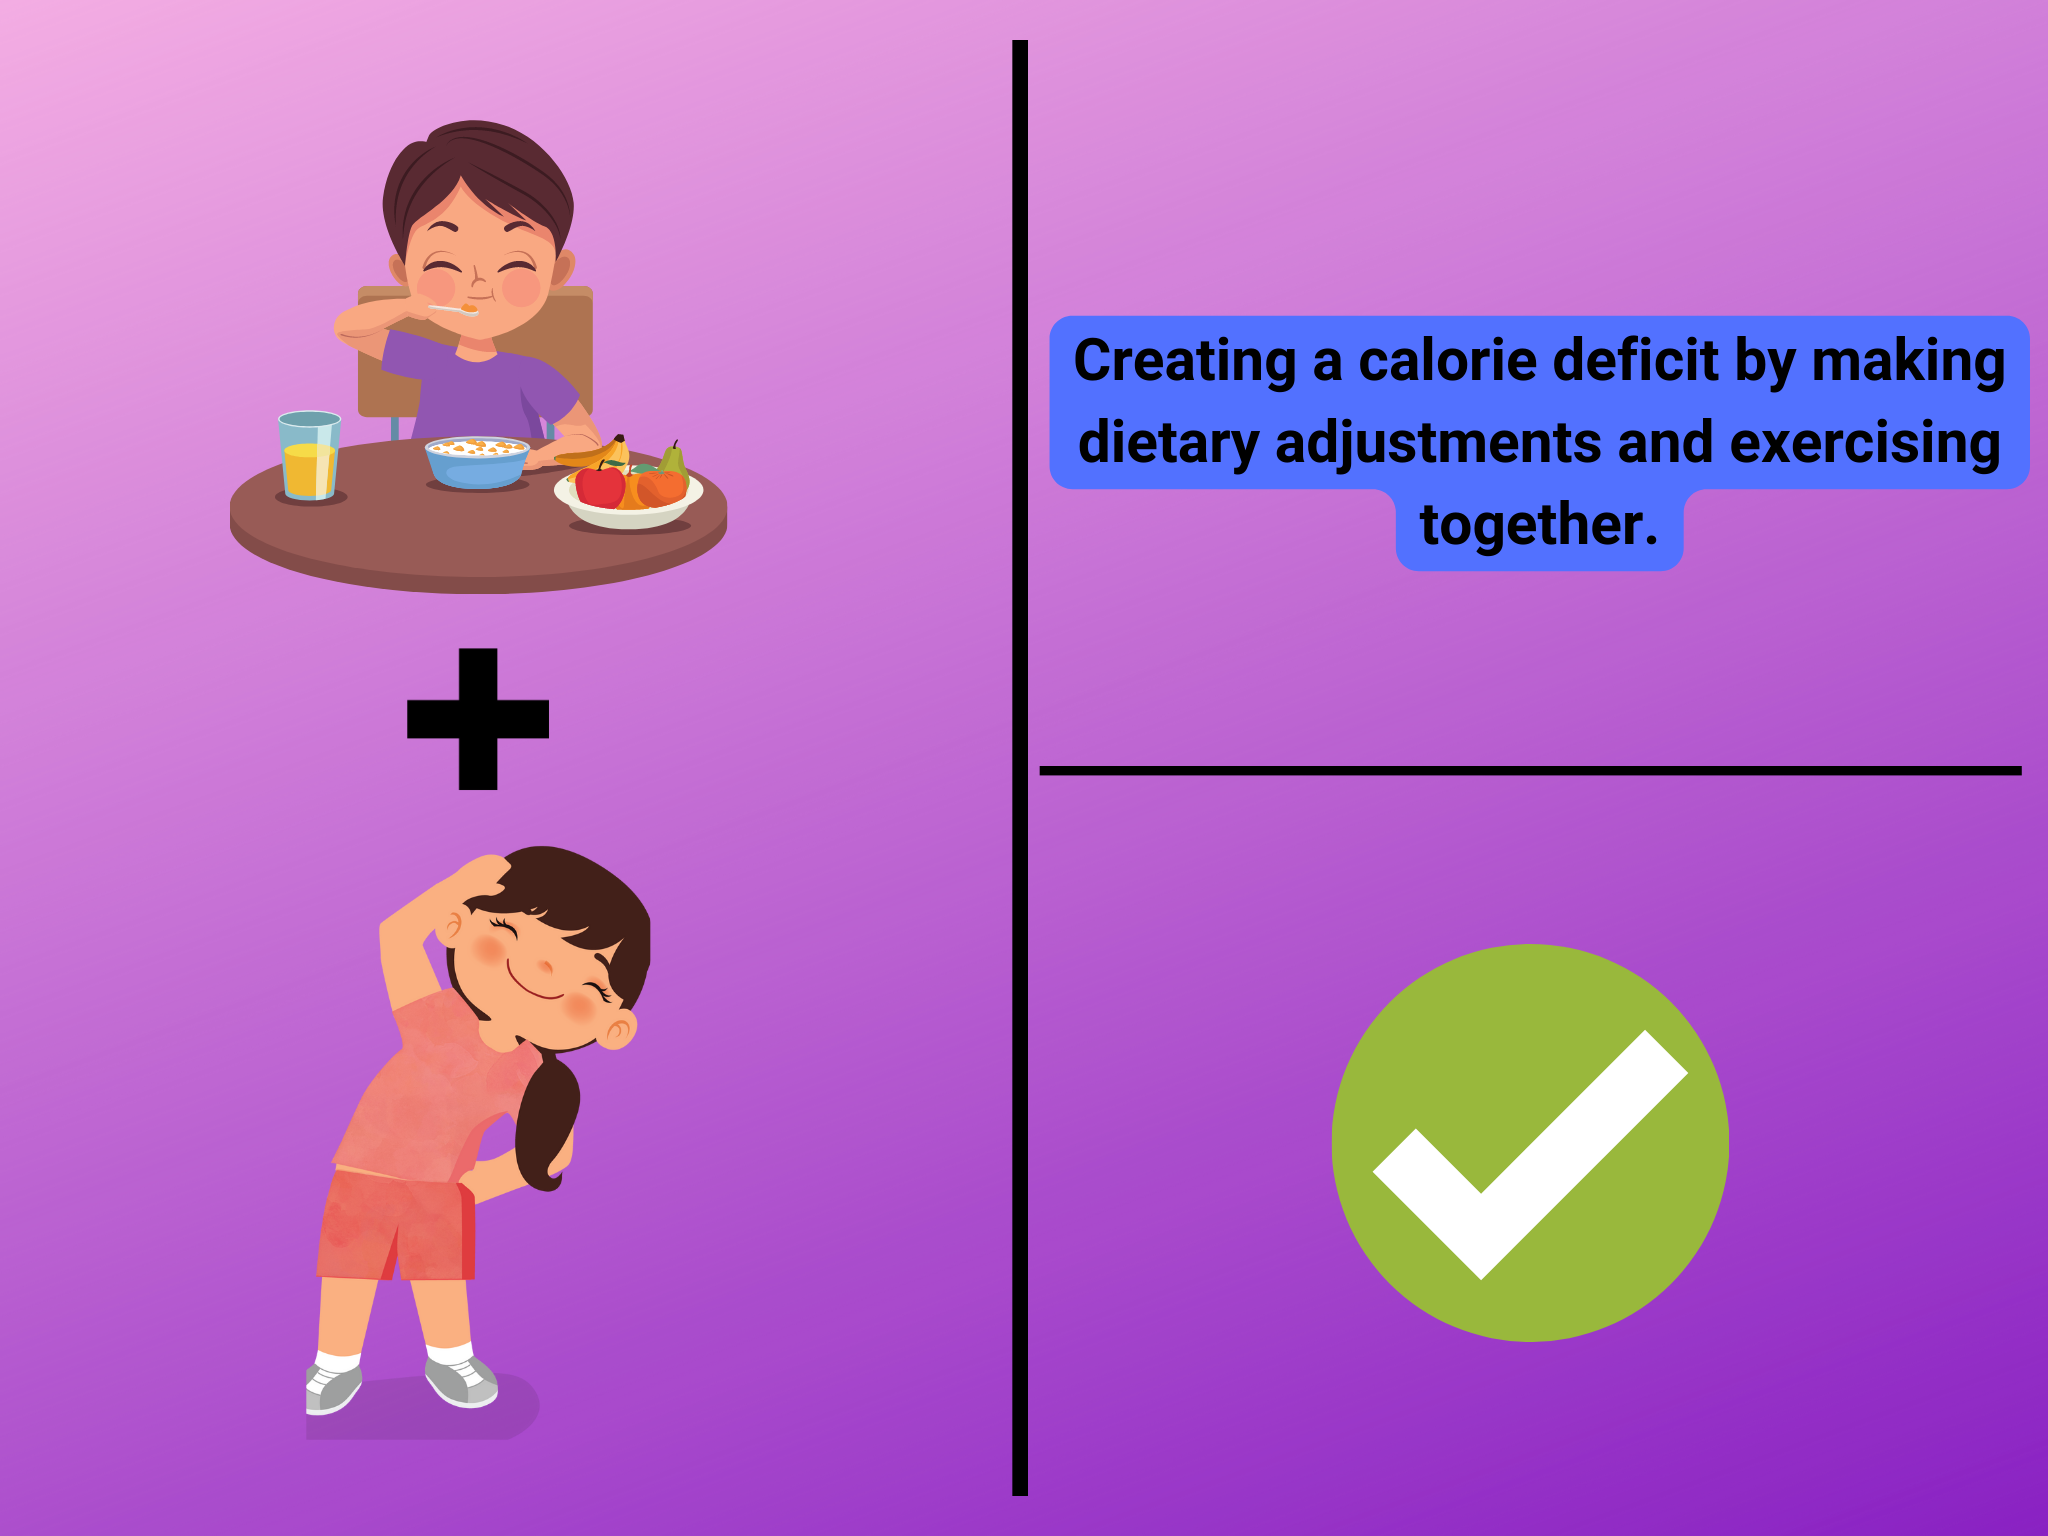 Creating a calorie deficit by making dietary adjustments and exercising together